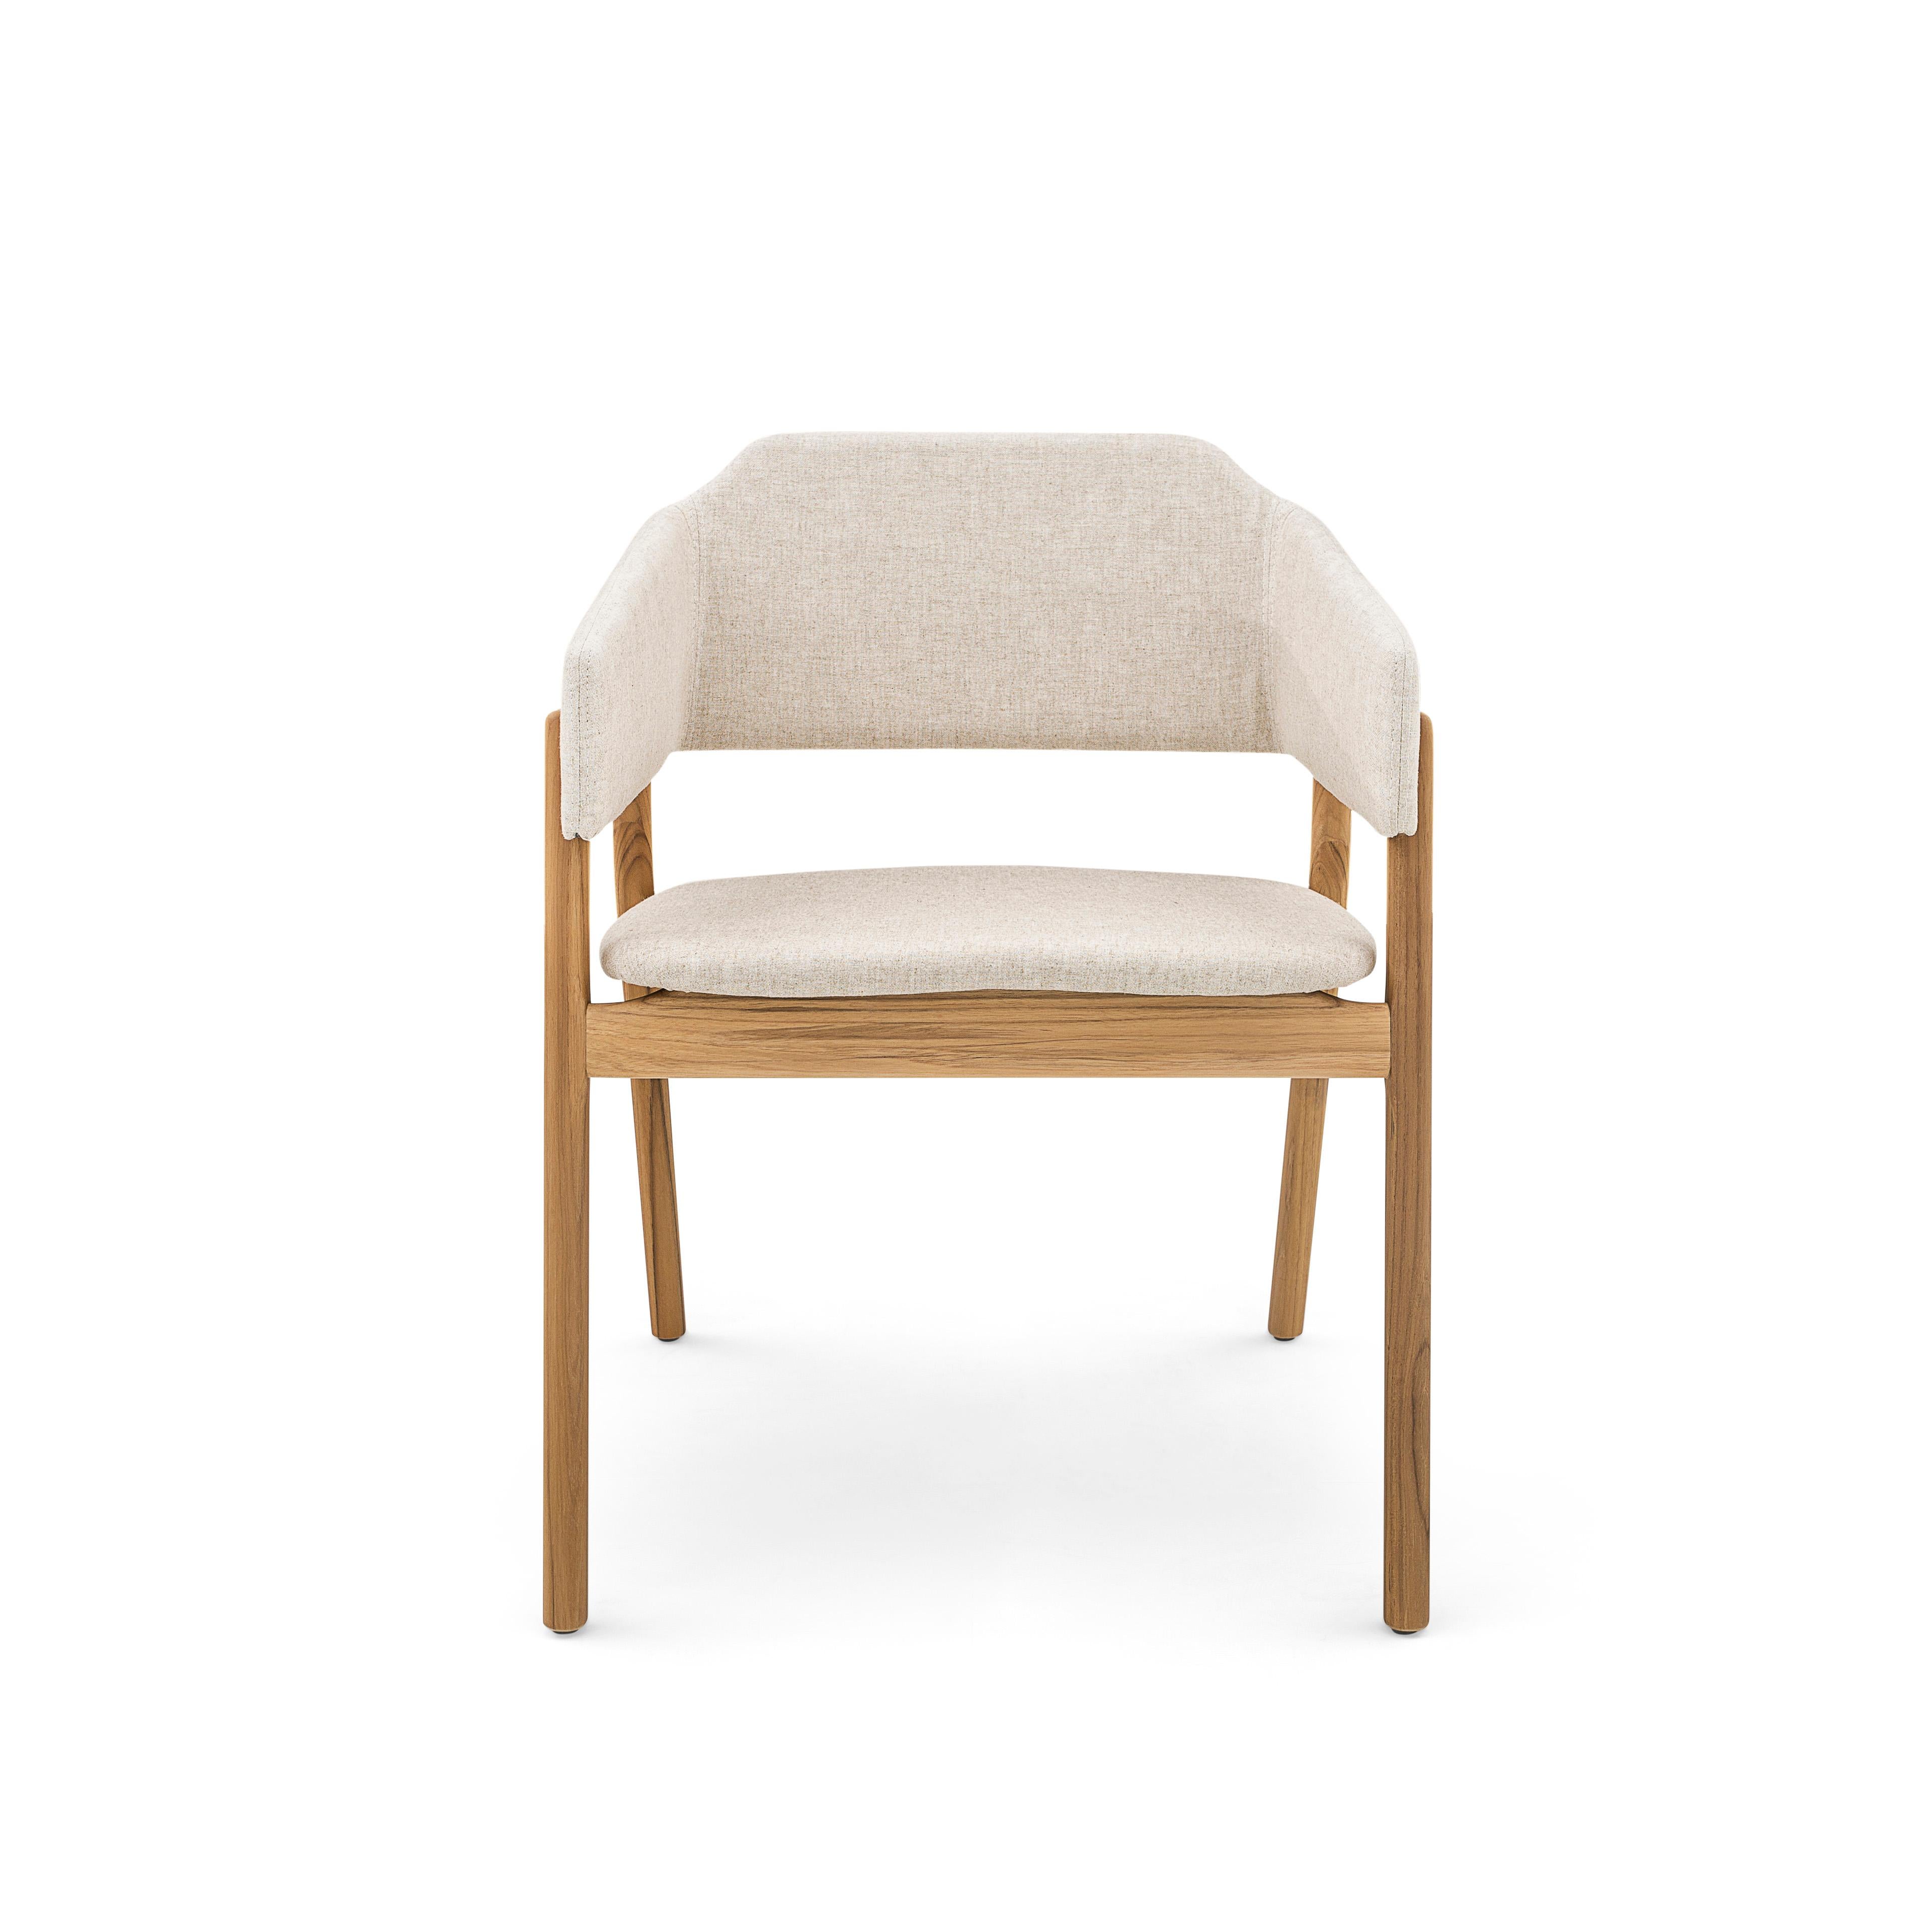 Our Uultis team has created this beautiful Stuzi dining chair to decorate your beautiful dining room table with an oatmeal fabric and a teak wood finish. This chair has a beautifully simple but elegant design that is going to perfectly go to combine